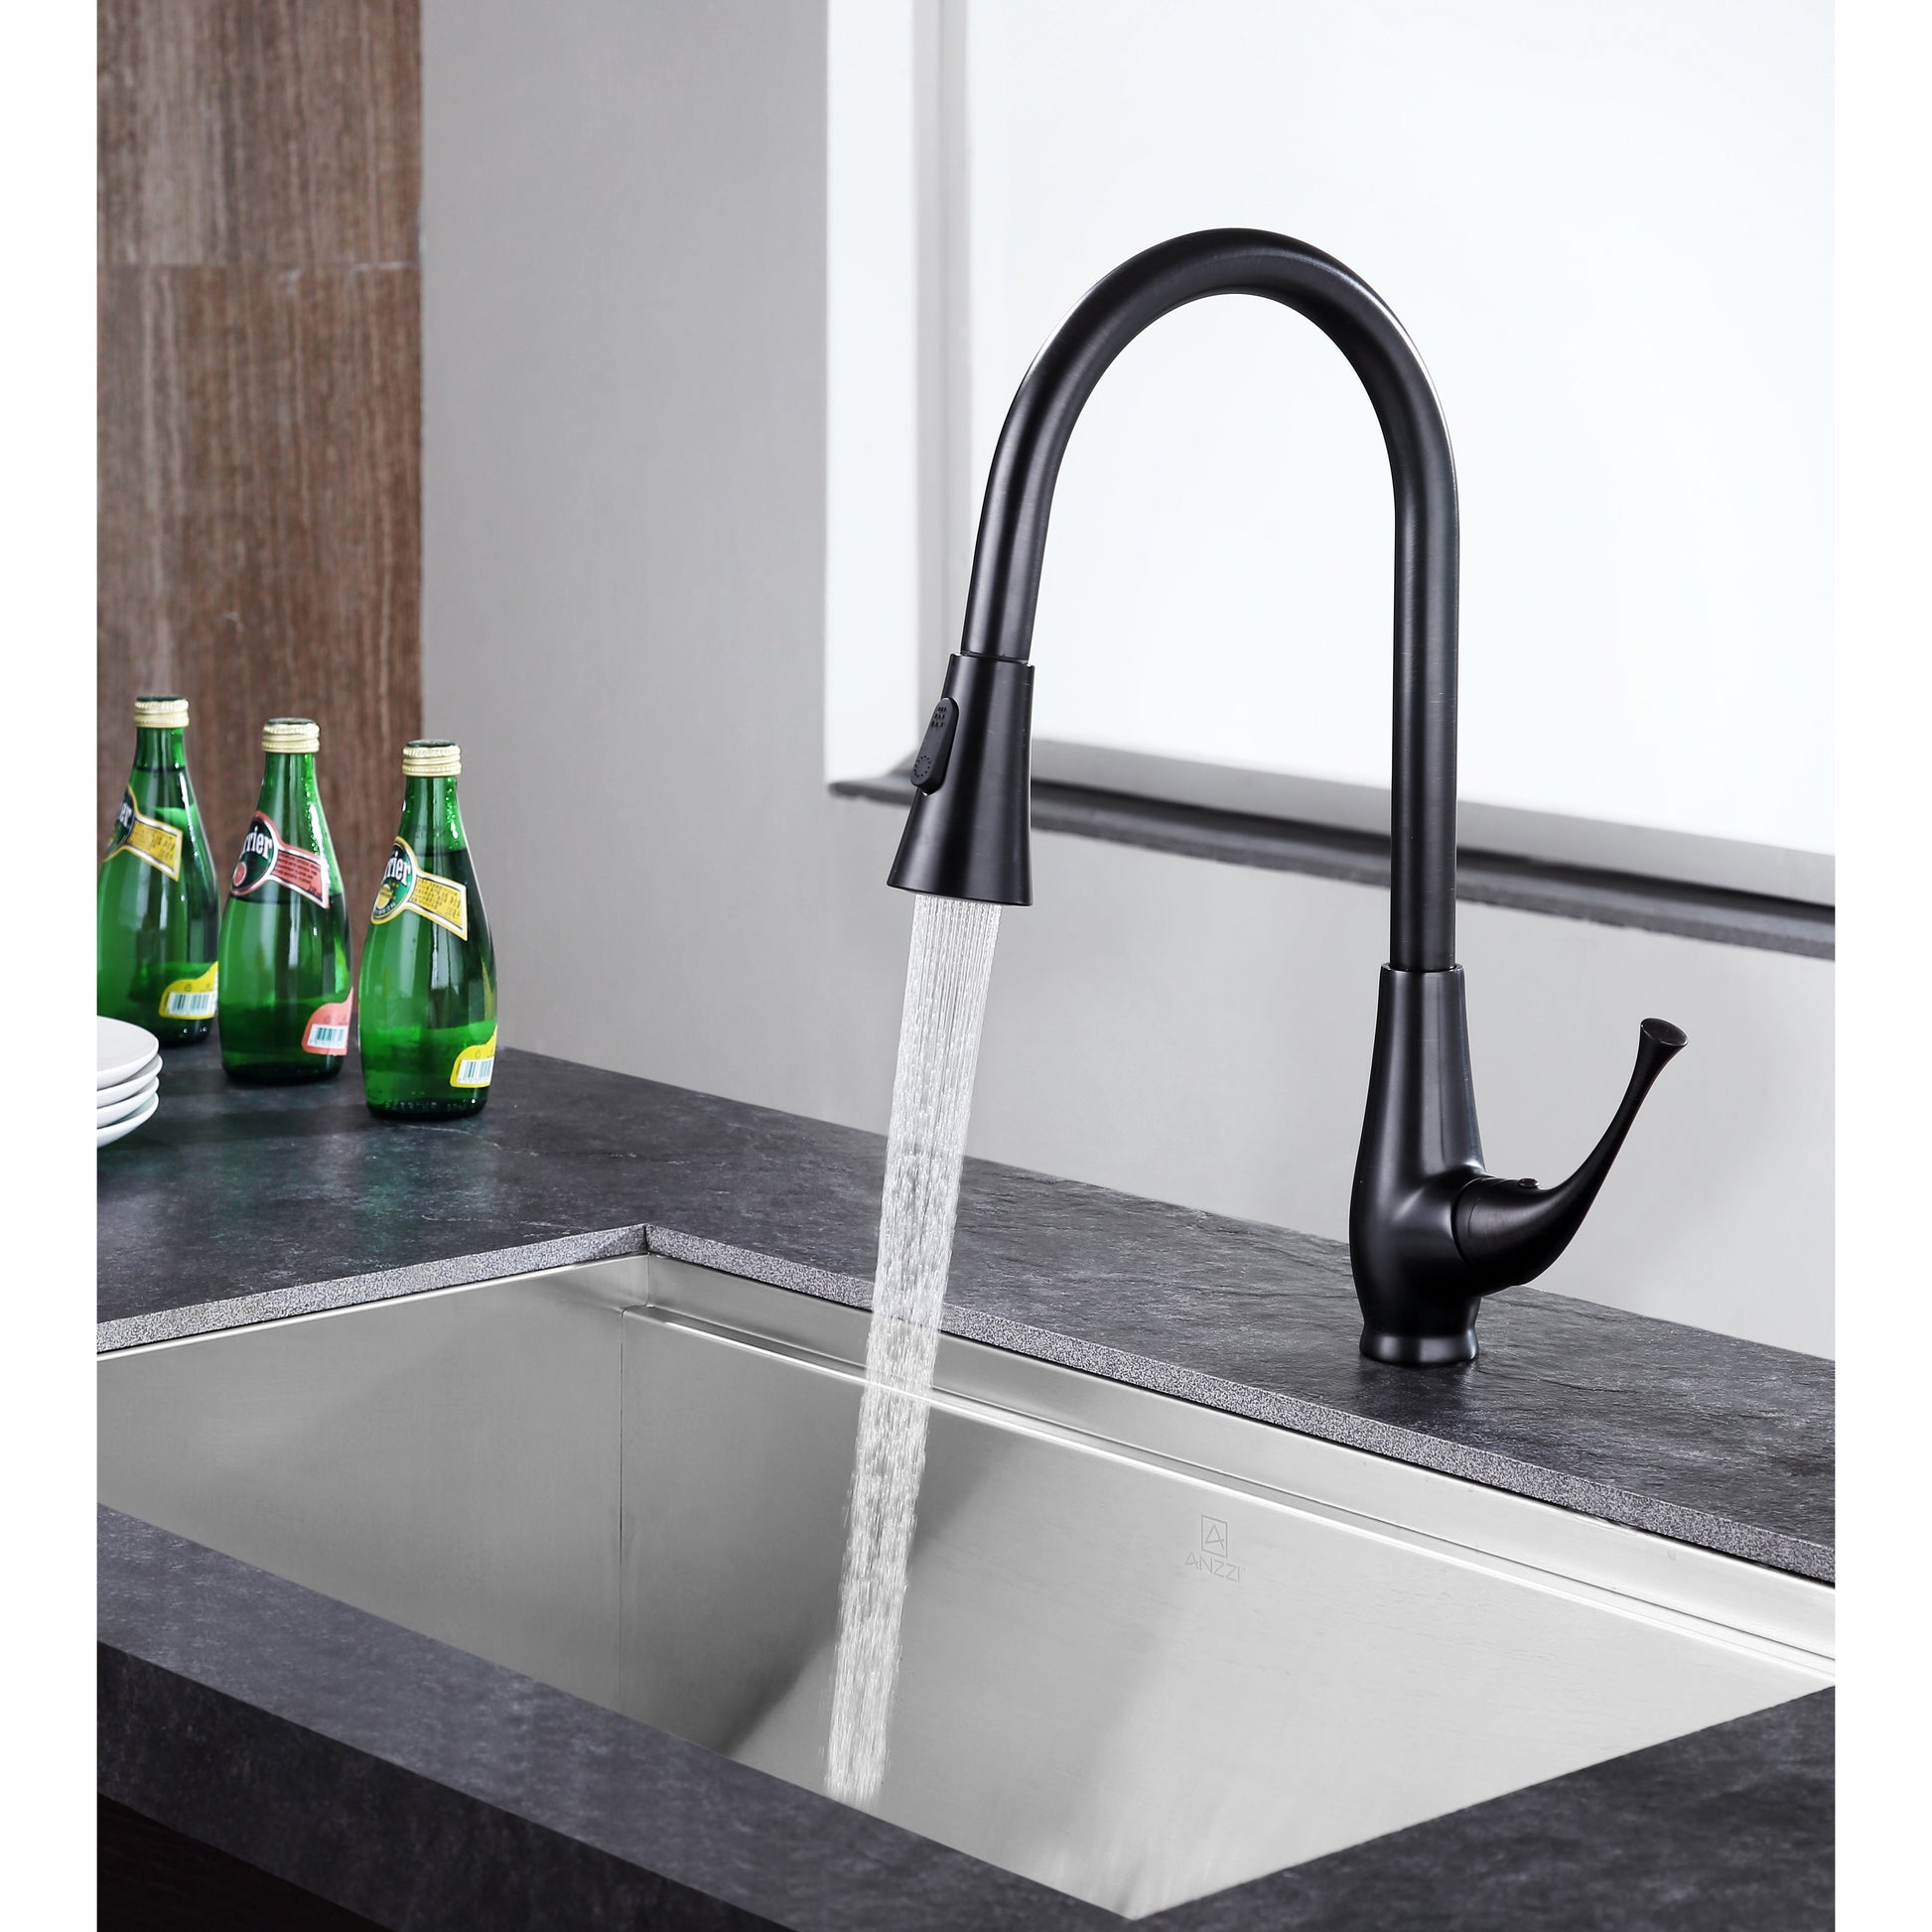 ANZZI Meadow Series Single Hole Oil Rubbed Bronze Kitchen Faucet With Euro-Grip Pull Down Sprayer